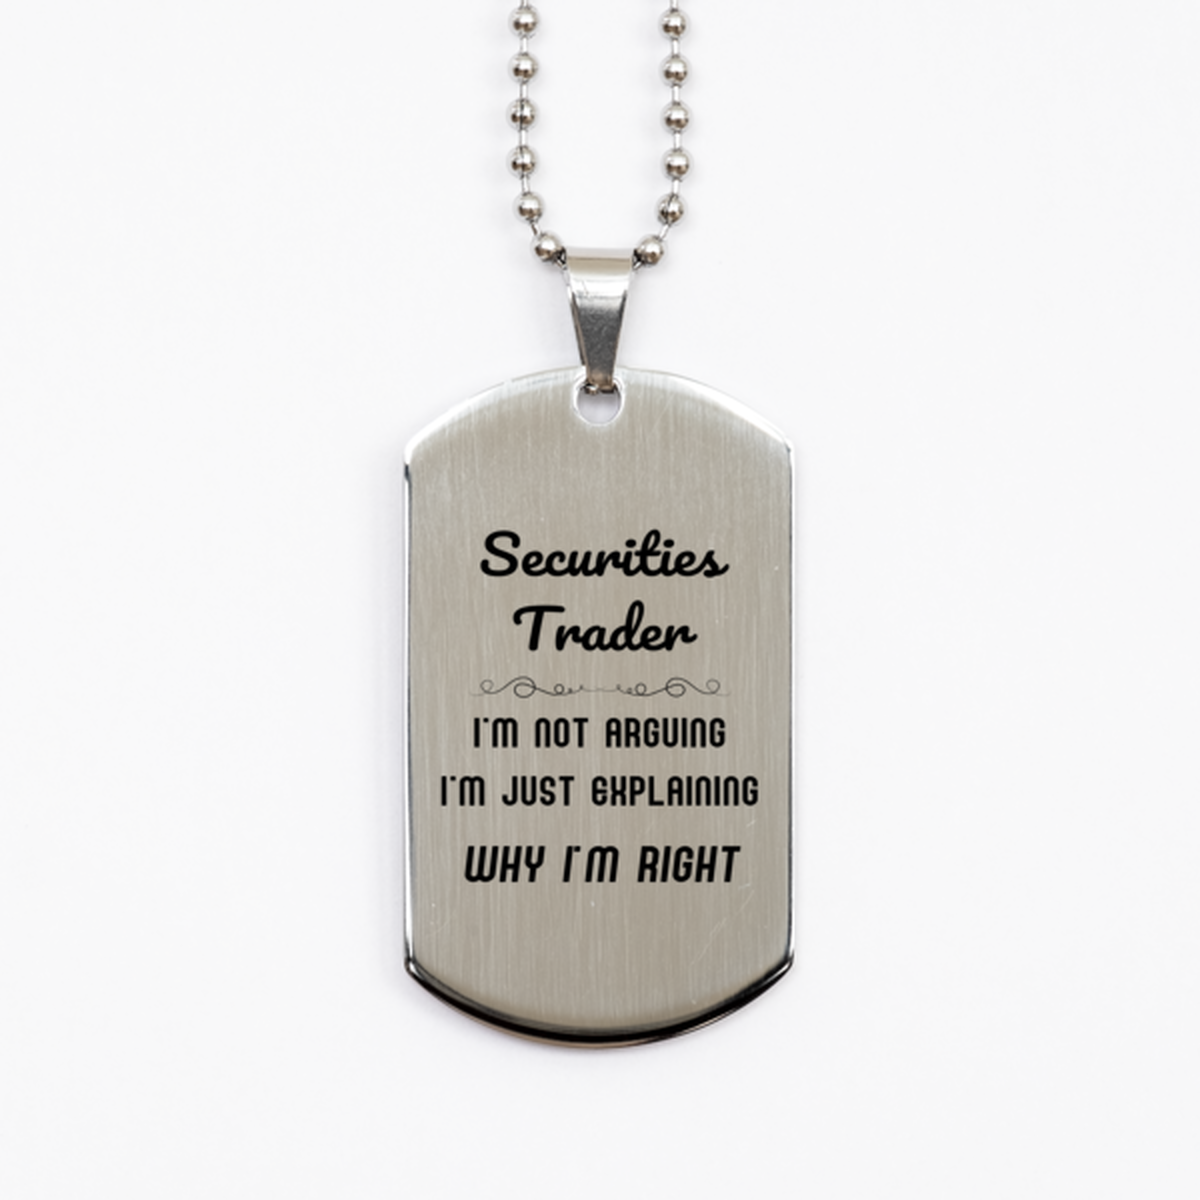 Securities Trader I'm not Arguing. I'm Just Explaining Why I'm RIGHT Silver Dog Tag, Funny Saying Quote Securities Trader Gifts For Securities Trader Graduation Birthday Christmas Gifts for Men Women Coworker